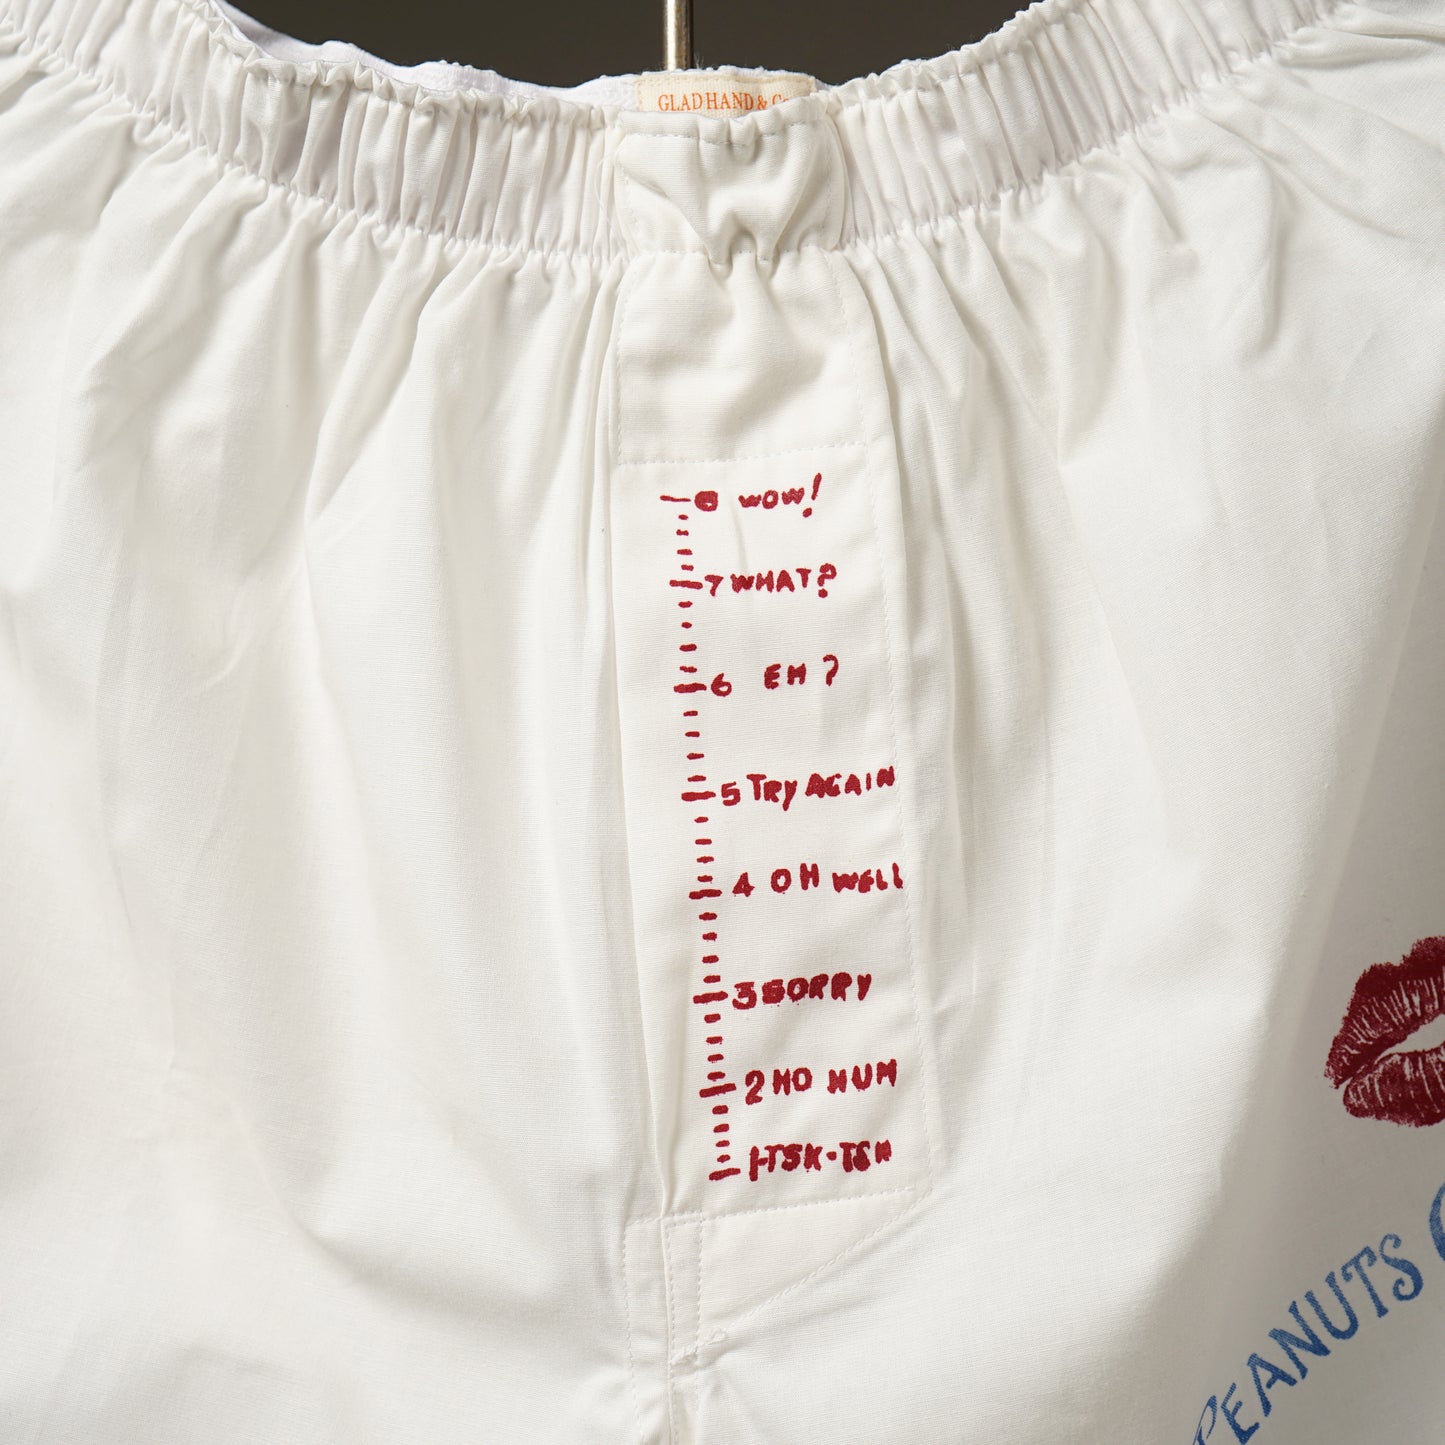 STANDARD BOXER SHORTS  04 "PANTY MESSAGE LOGO"【Peanuts & Co × GLADHAND & Co.】